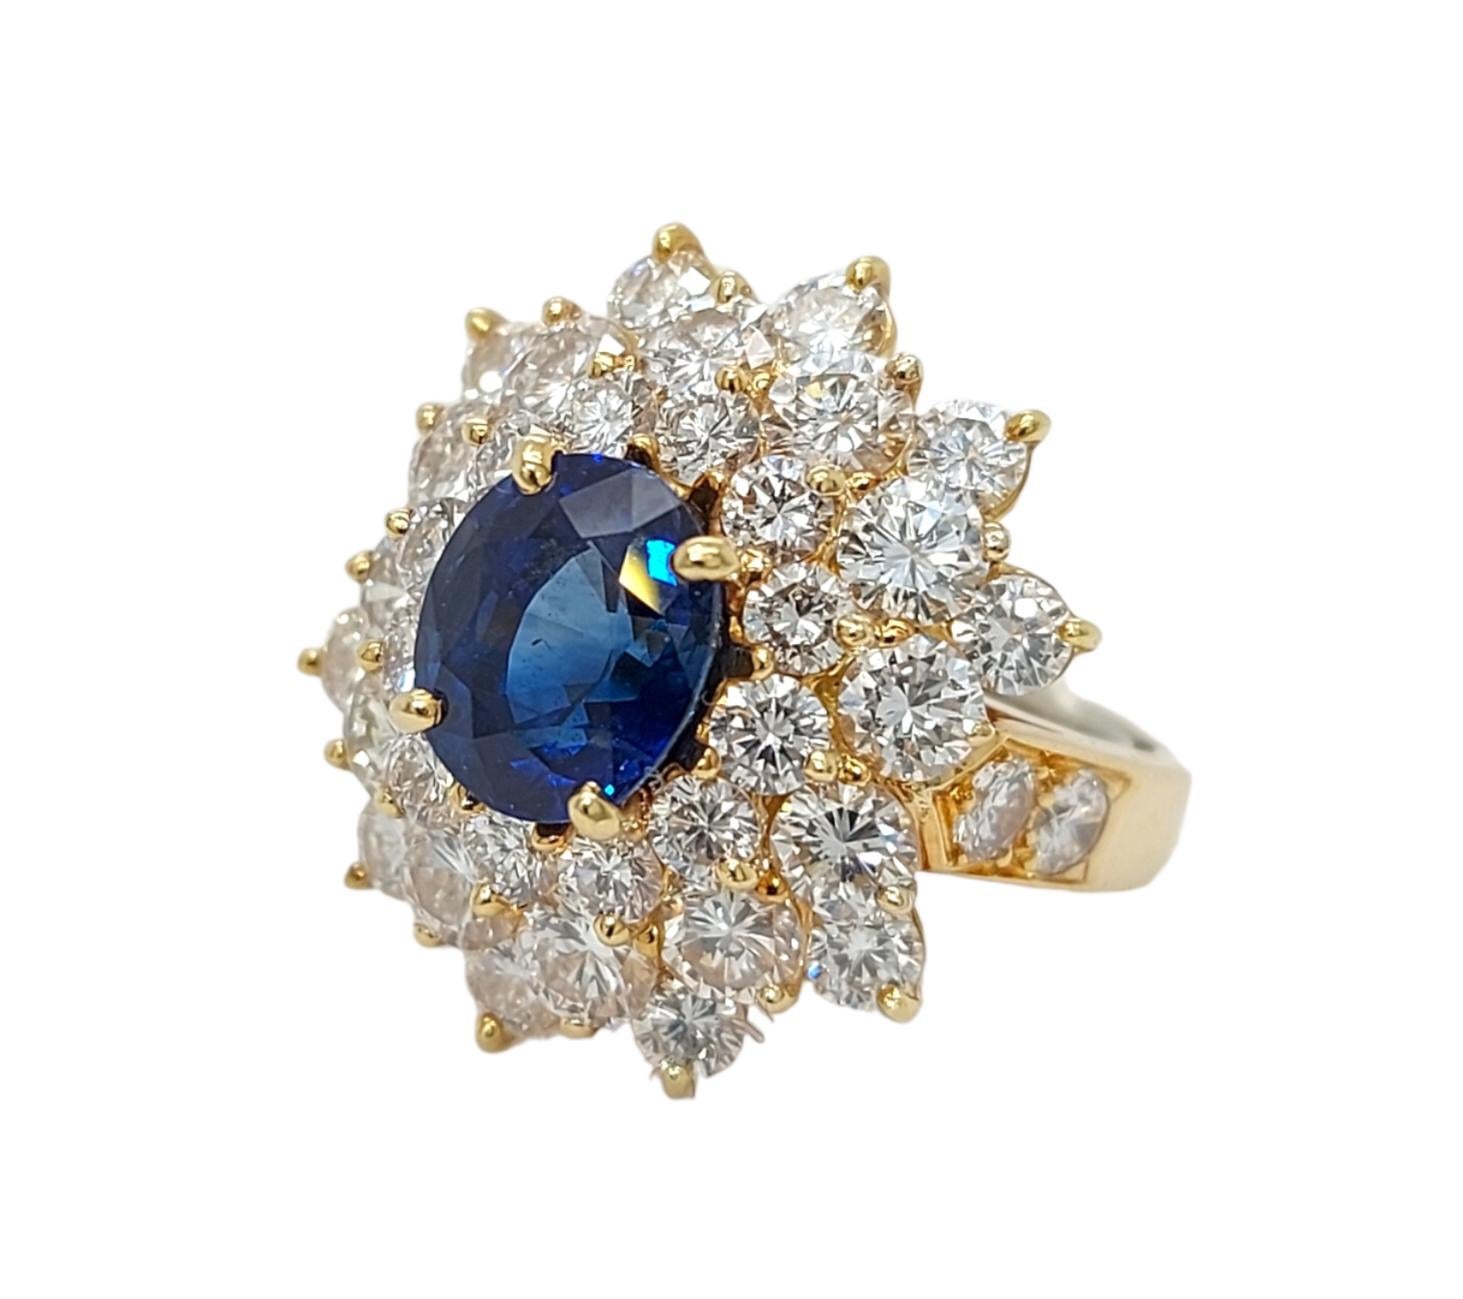 18 kt Yellow Gold Ring with 2ct Sapphire and 2.8ct Diamonds, Estate Sultan Oman In Excellent Condition For Sale In Antwerp, BE